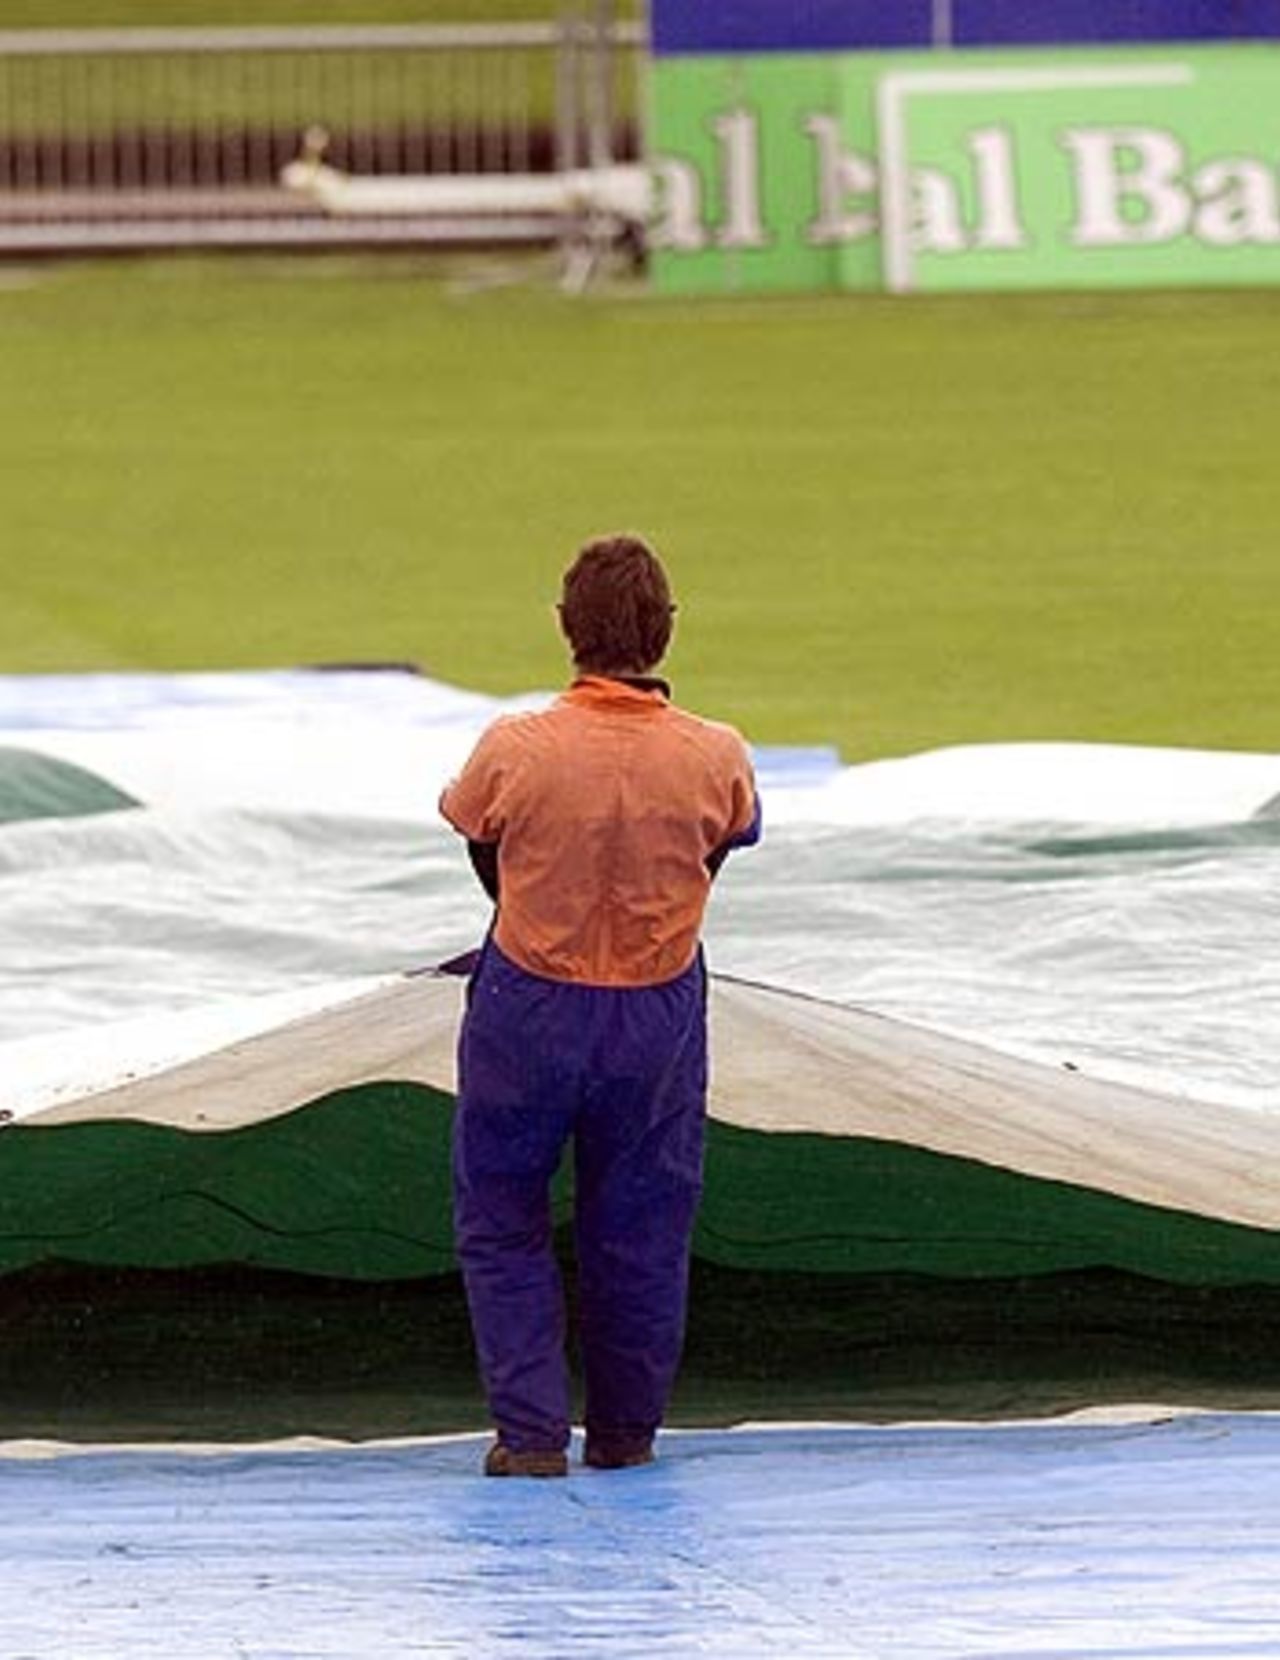 A groundsman brings on the covers at Napier, New Zealand v West Indies, 3rd Test, Napier, 4th day, March 28, 2006